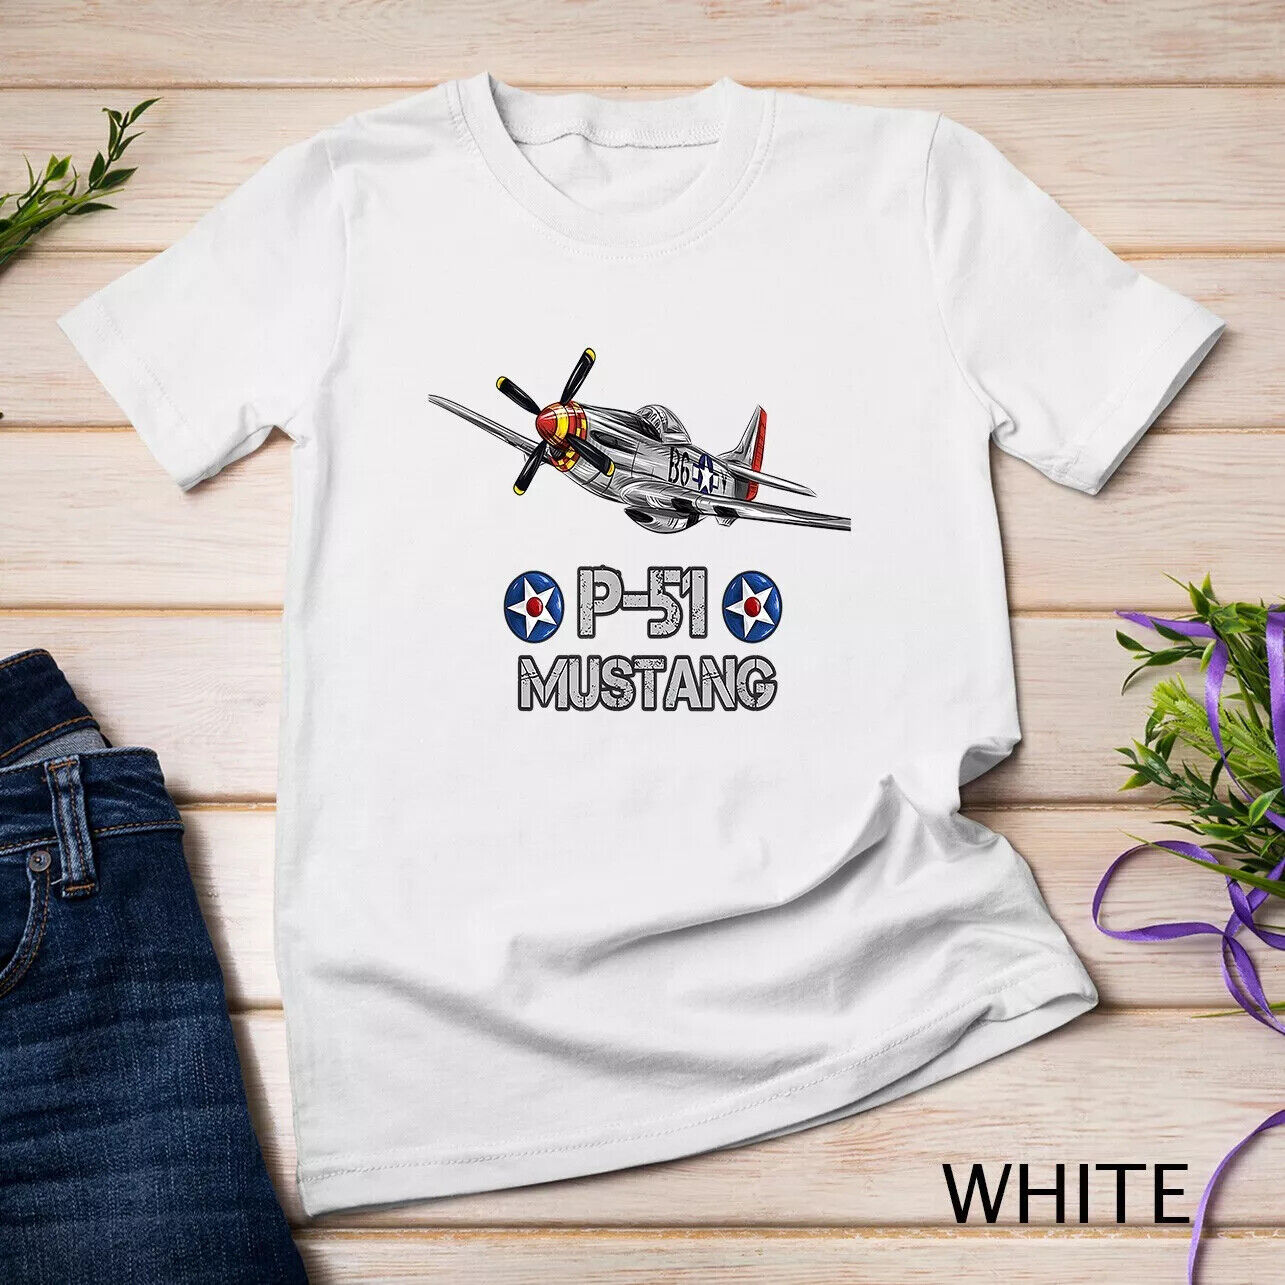 P-51 Mustang Fighter Airplane Retro Vintage T-shirt S-5XL